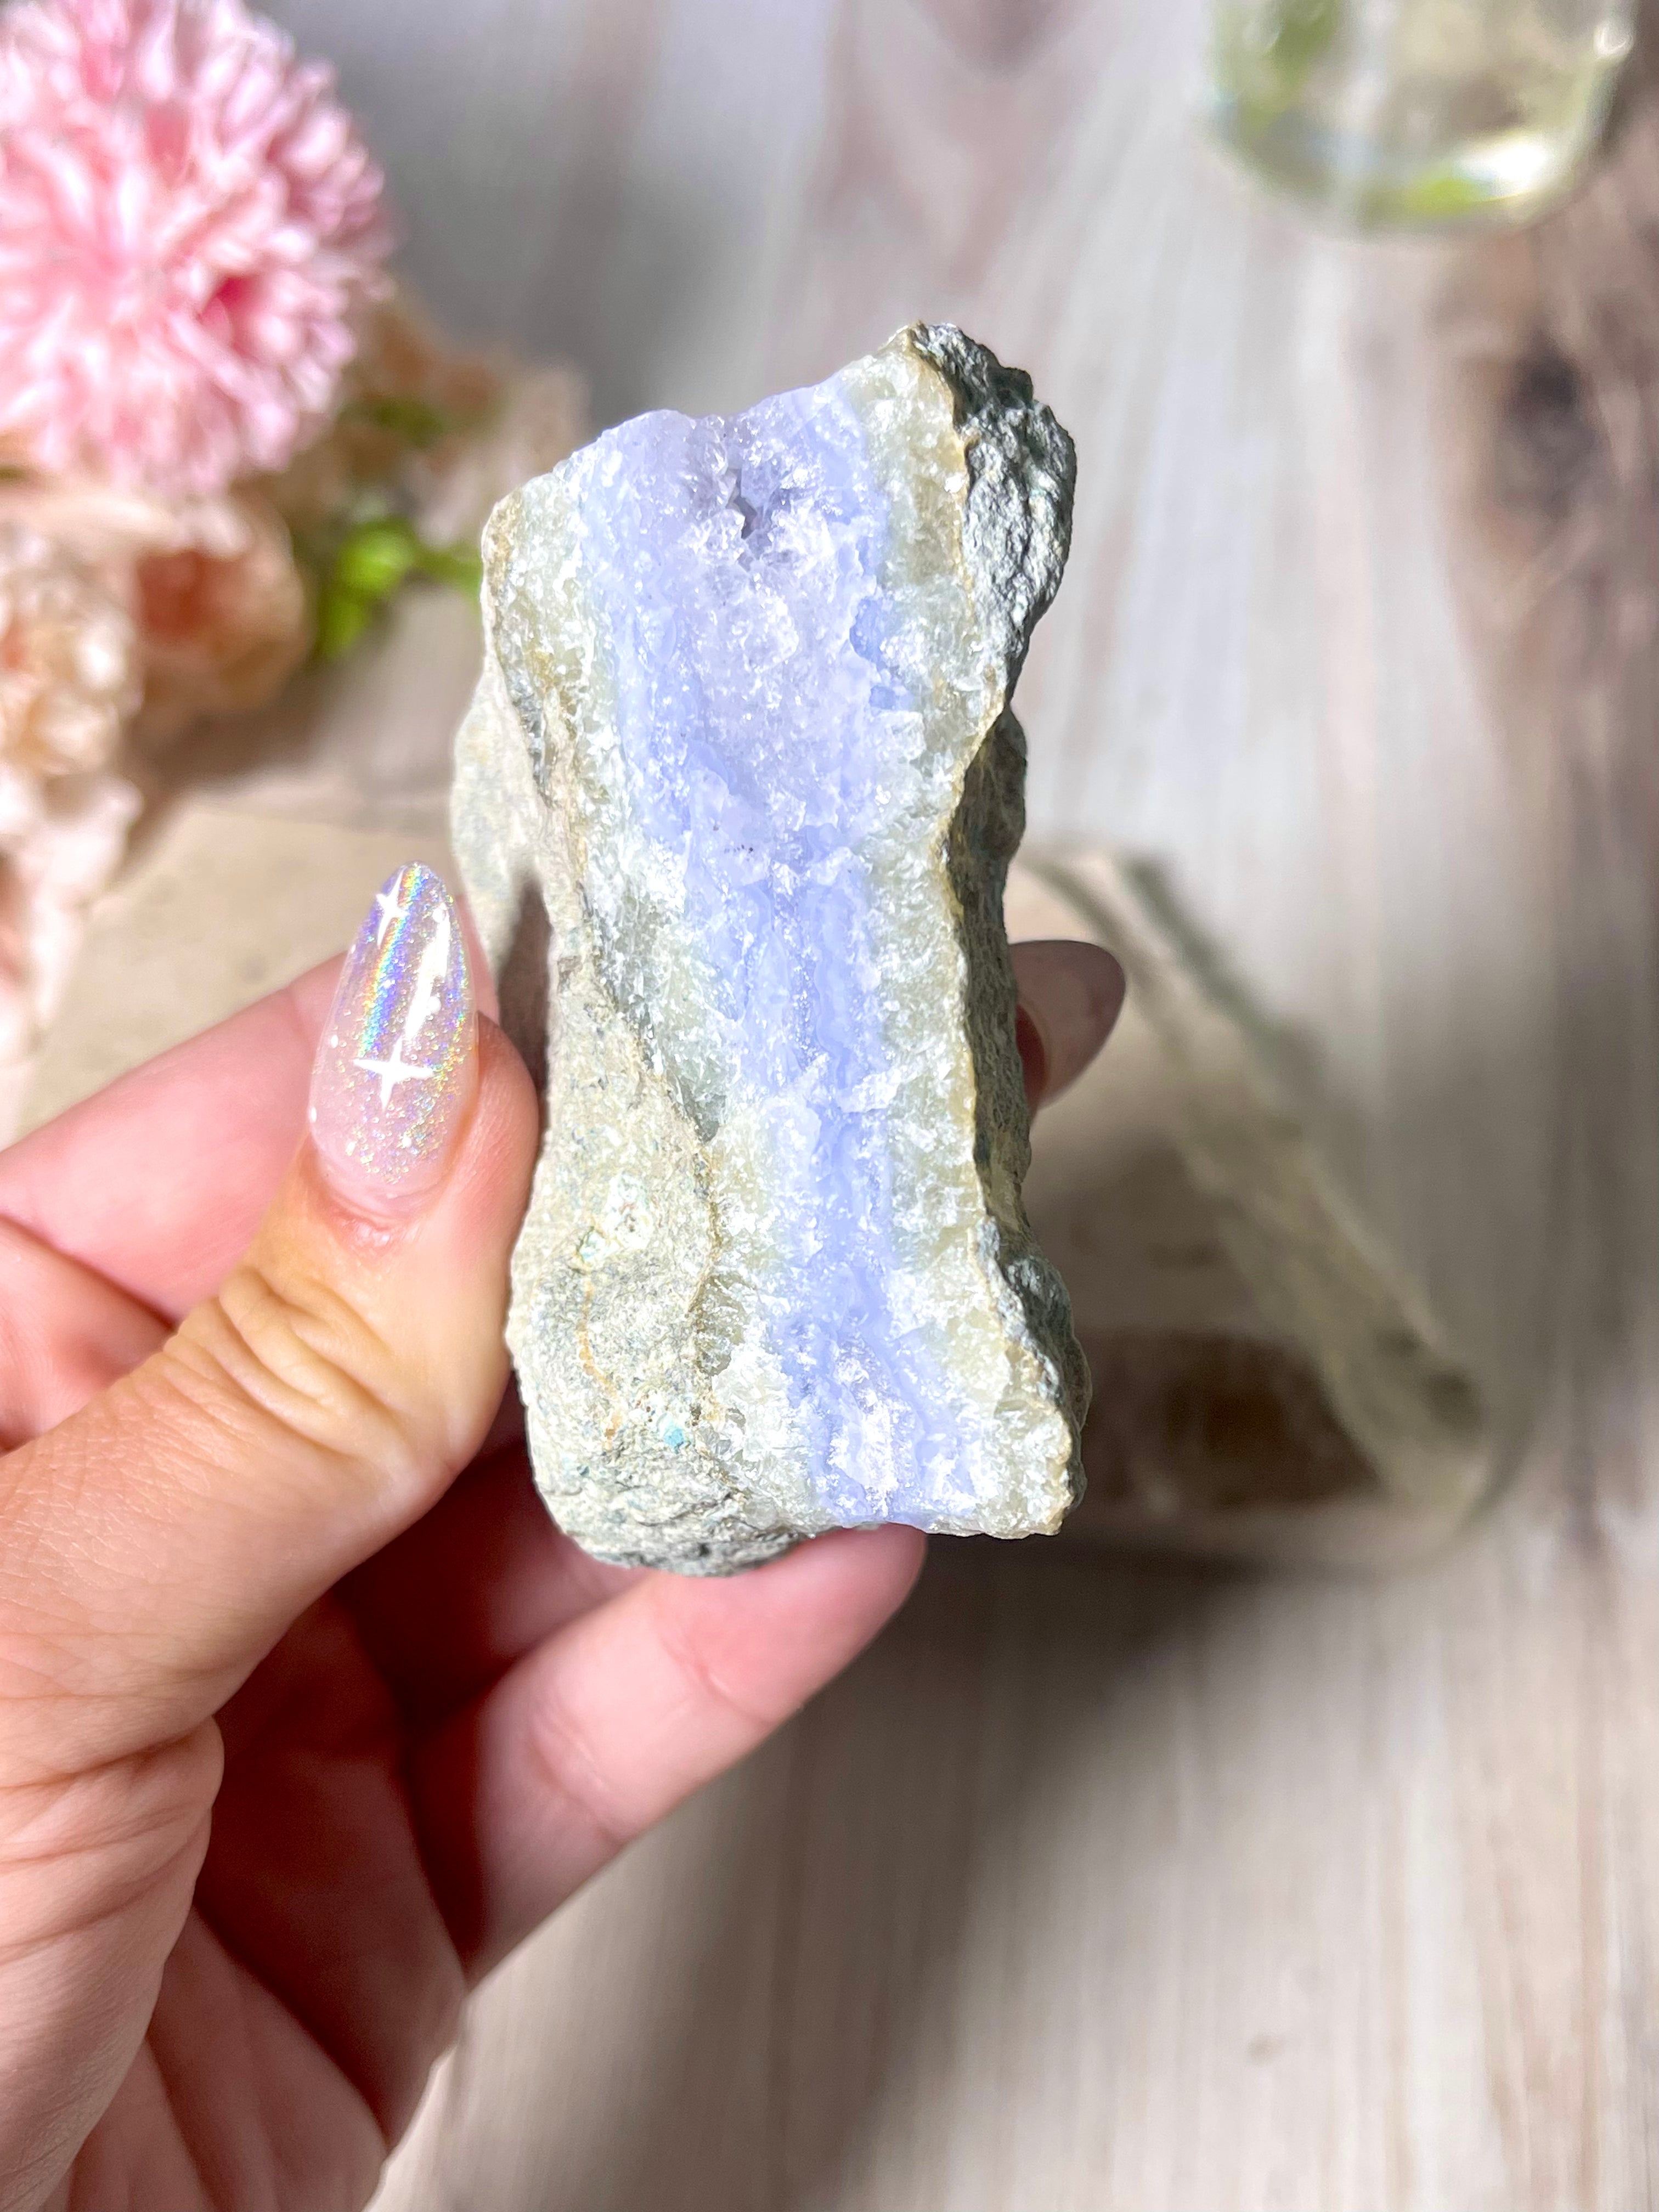 Raw Blue Lace Agate